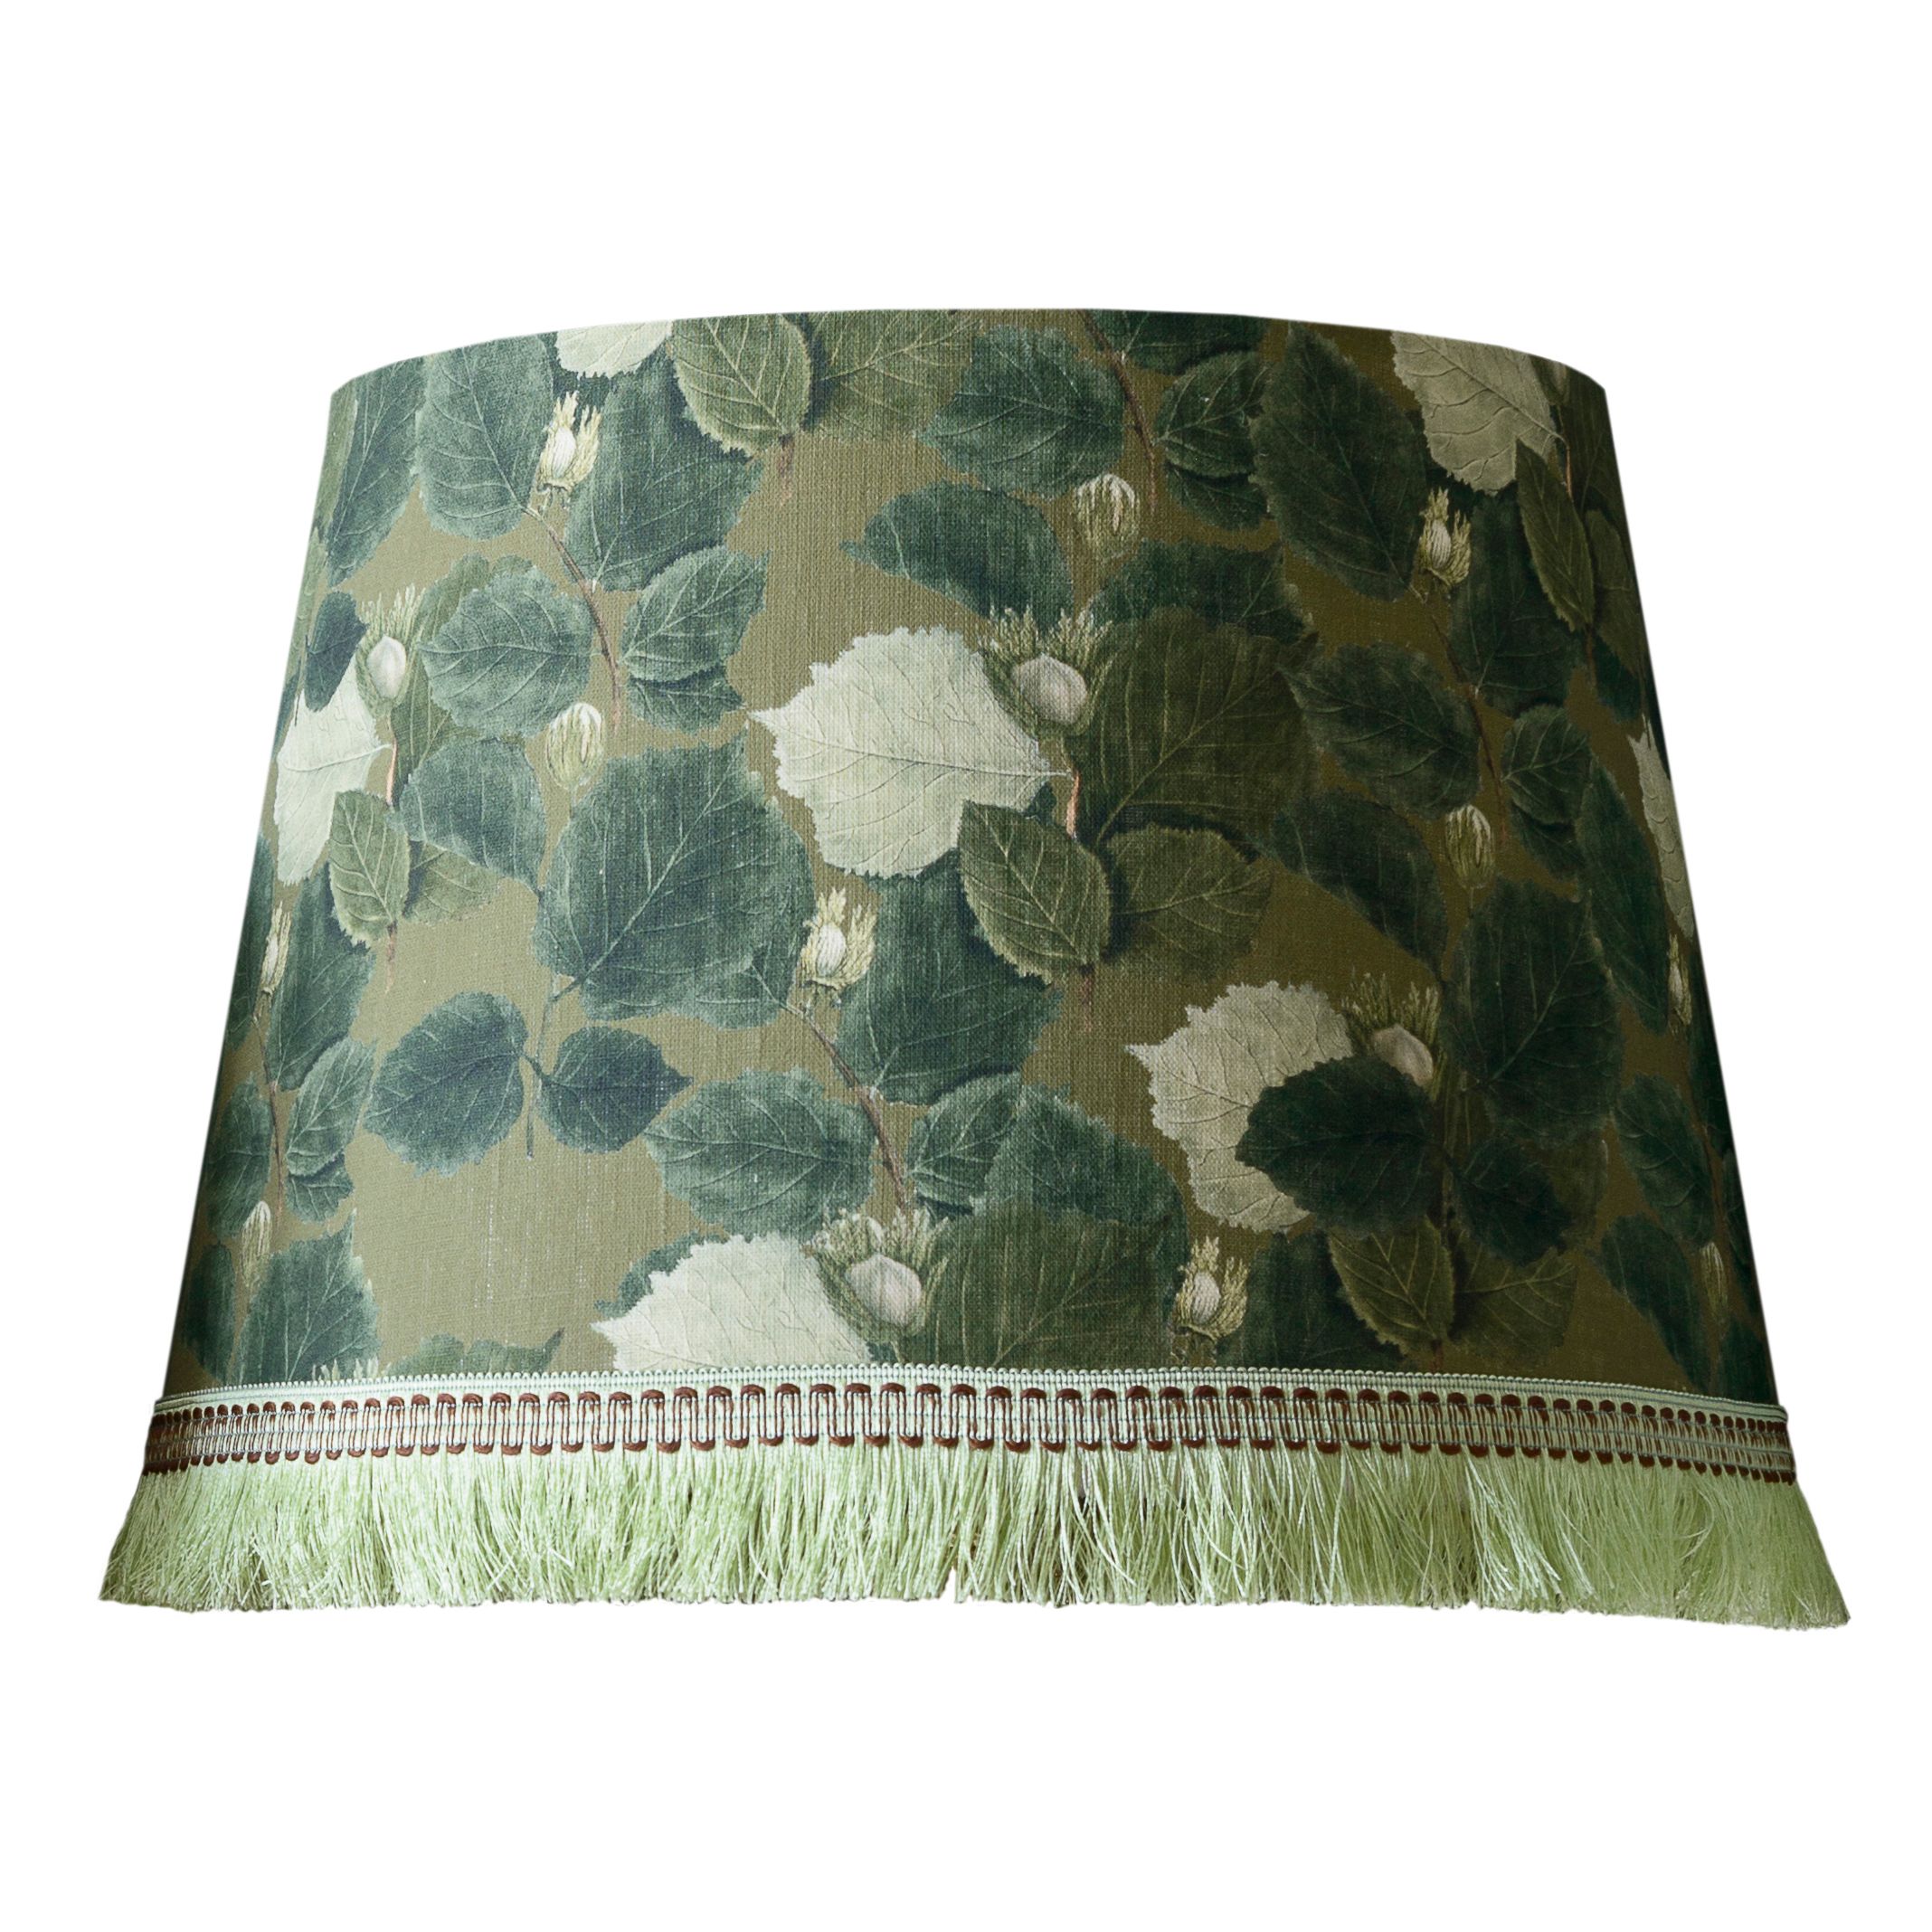 COUNTRY FLOWERS Lampshade 45cm x 55cm x Height 35cm